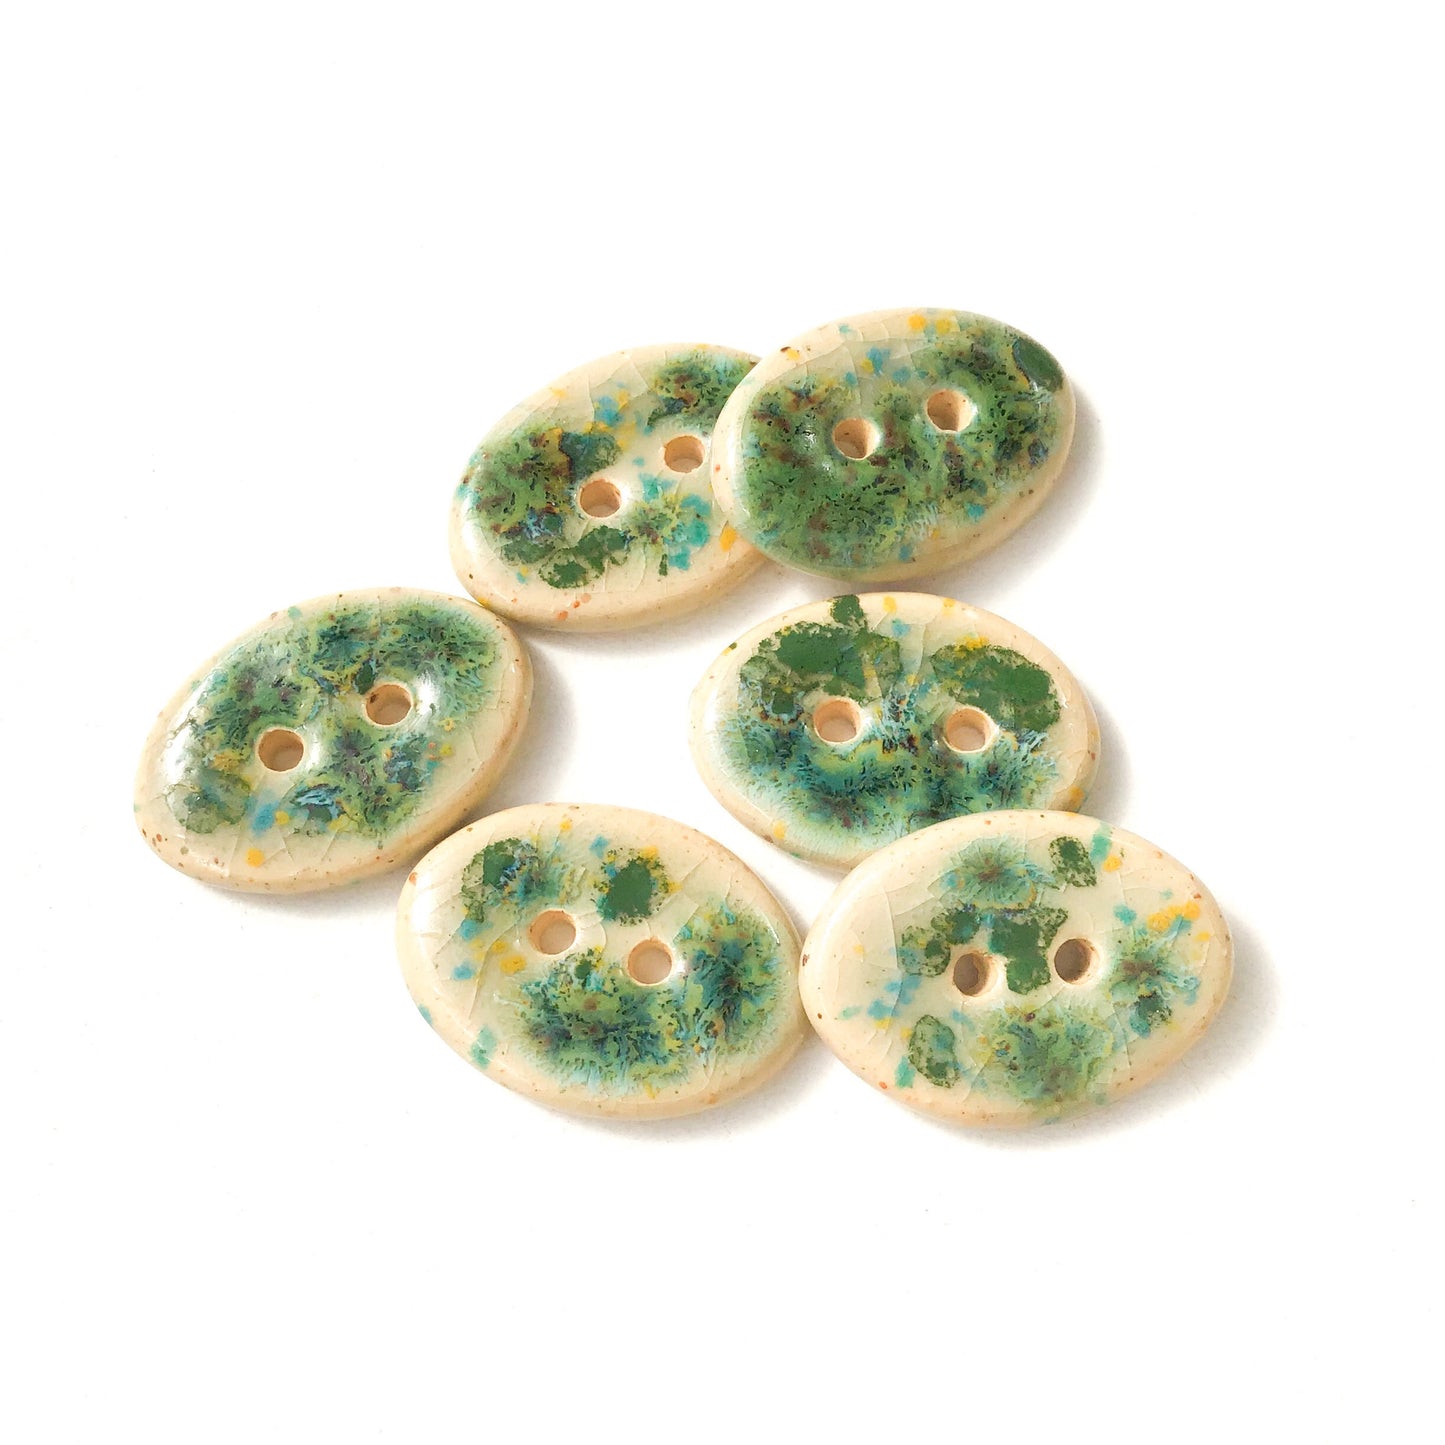 Algae Green Speckled Ceramic Buttons - Oval Clay Buttons - 5/8" x 7/8" (ws-3)